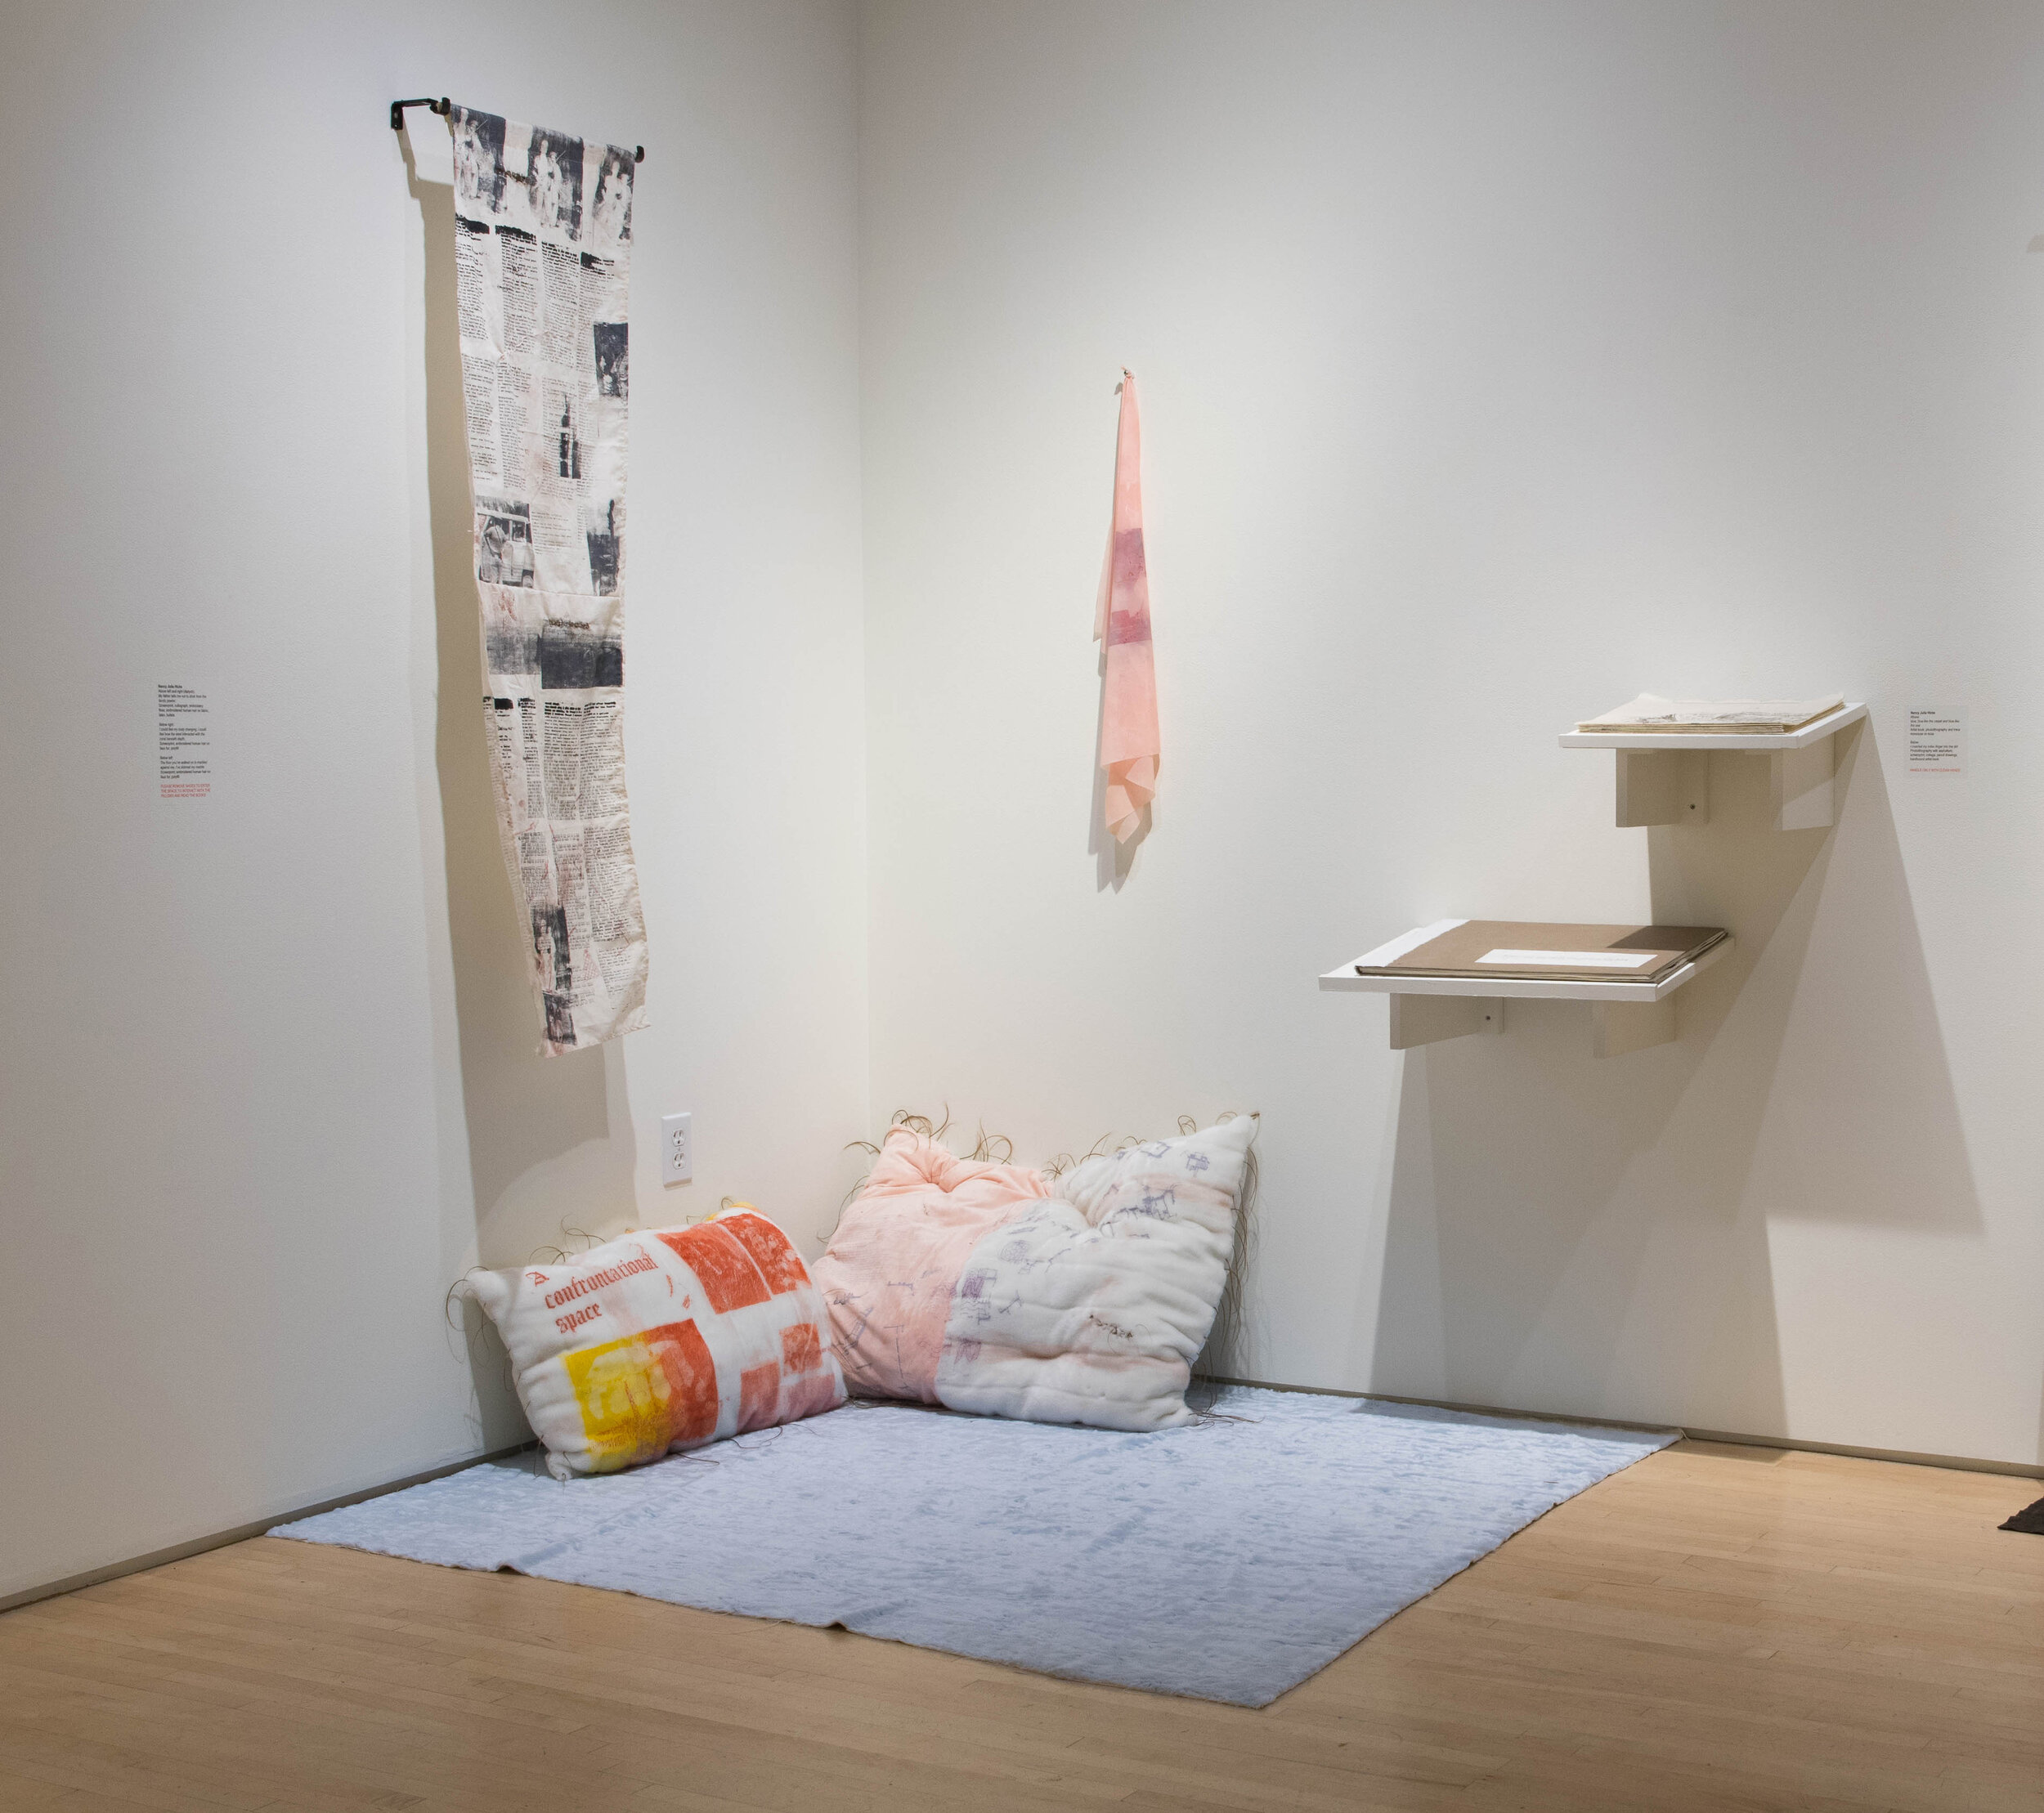   Comfort Installation   Mixed media installation containing screenprinted faux fur pillows, embroidery, artist books, and screenprint and bullets on latex  2019 